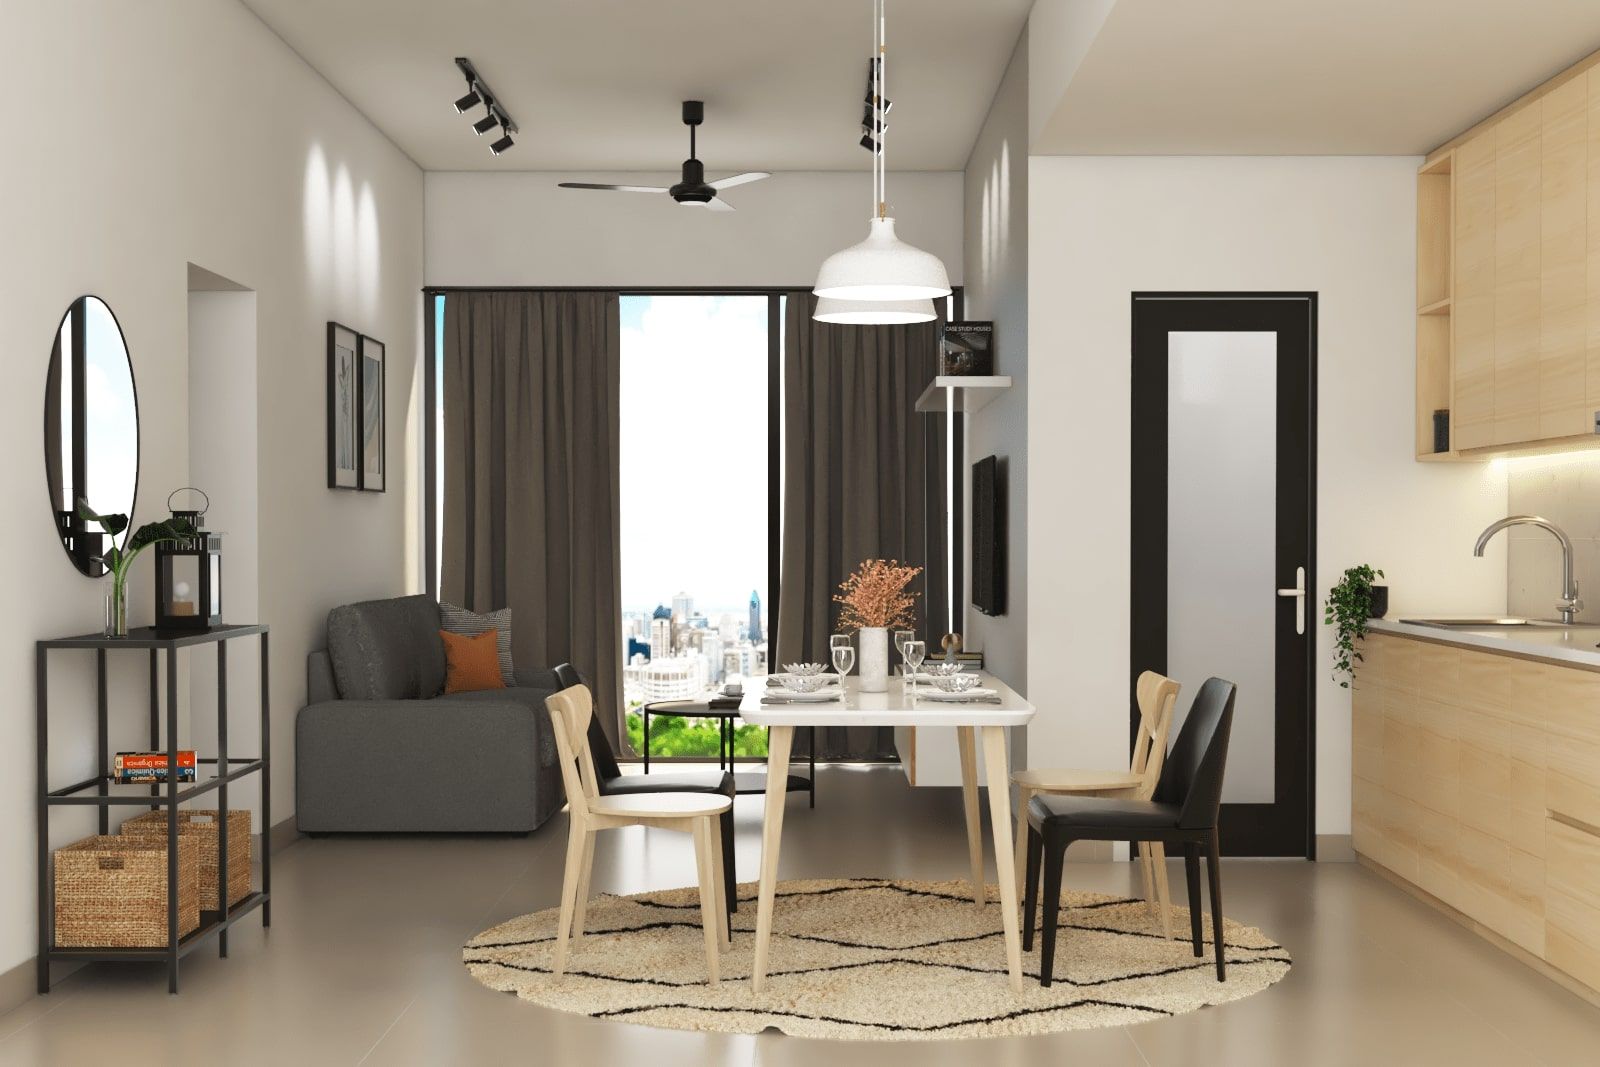 Contemporary 4-Seater Dining Room Design With Circular Rug